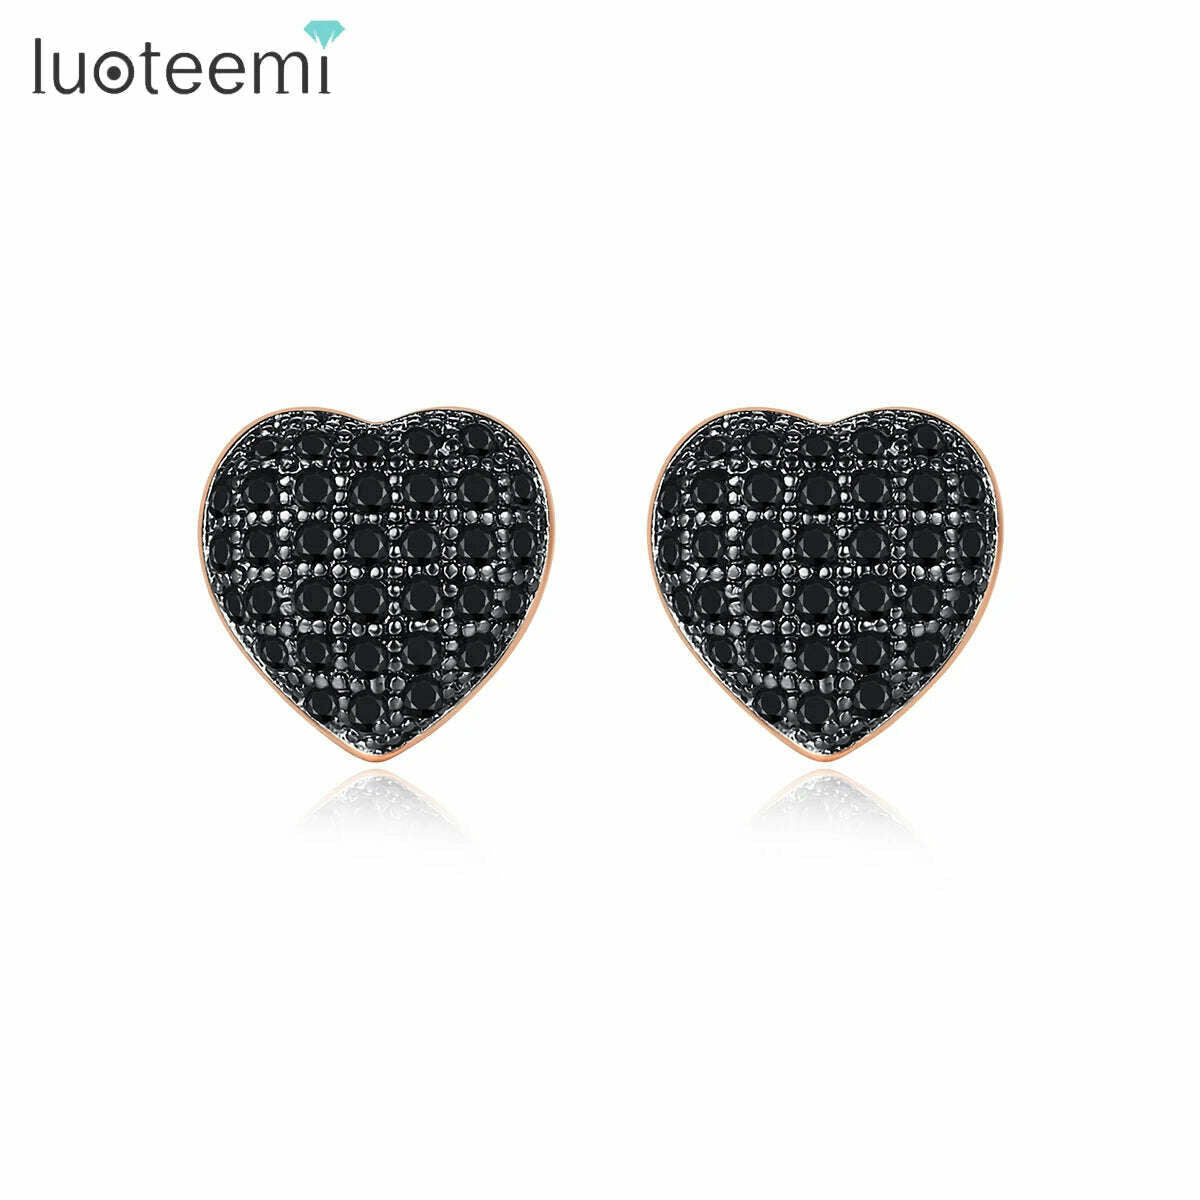 KIMLUD, LUOTEEMI Lovely Small Heart Stud Earrings for Women Girls Dating Shiny Cubic Zircon Fashion Jewelry Friend Tiny Christmas Gifts, KIMLUD Womens Clothes